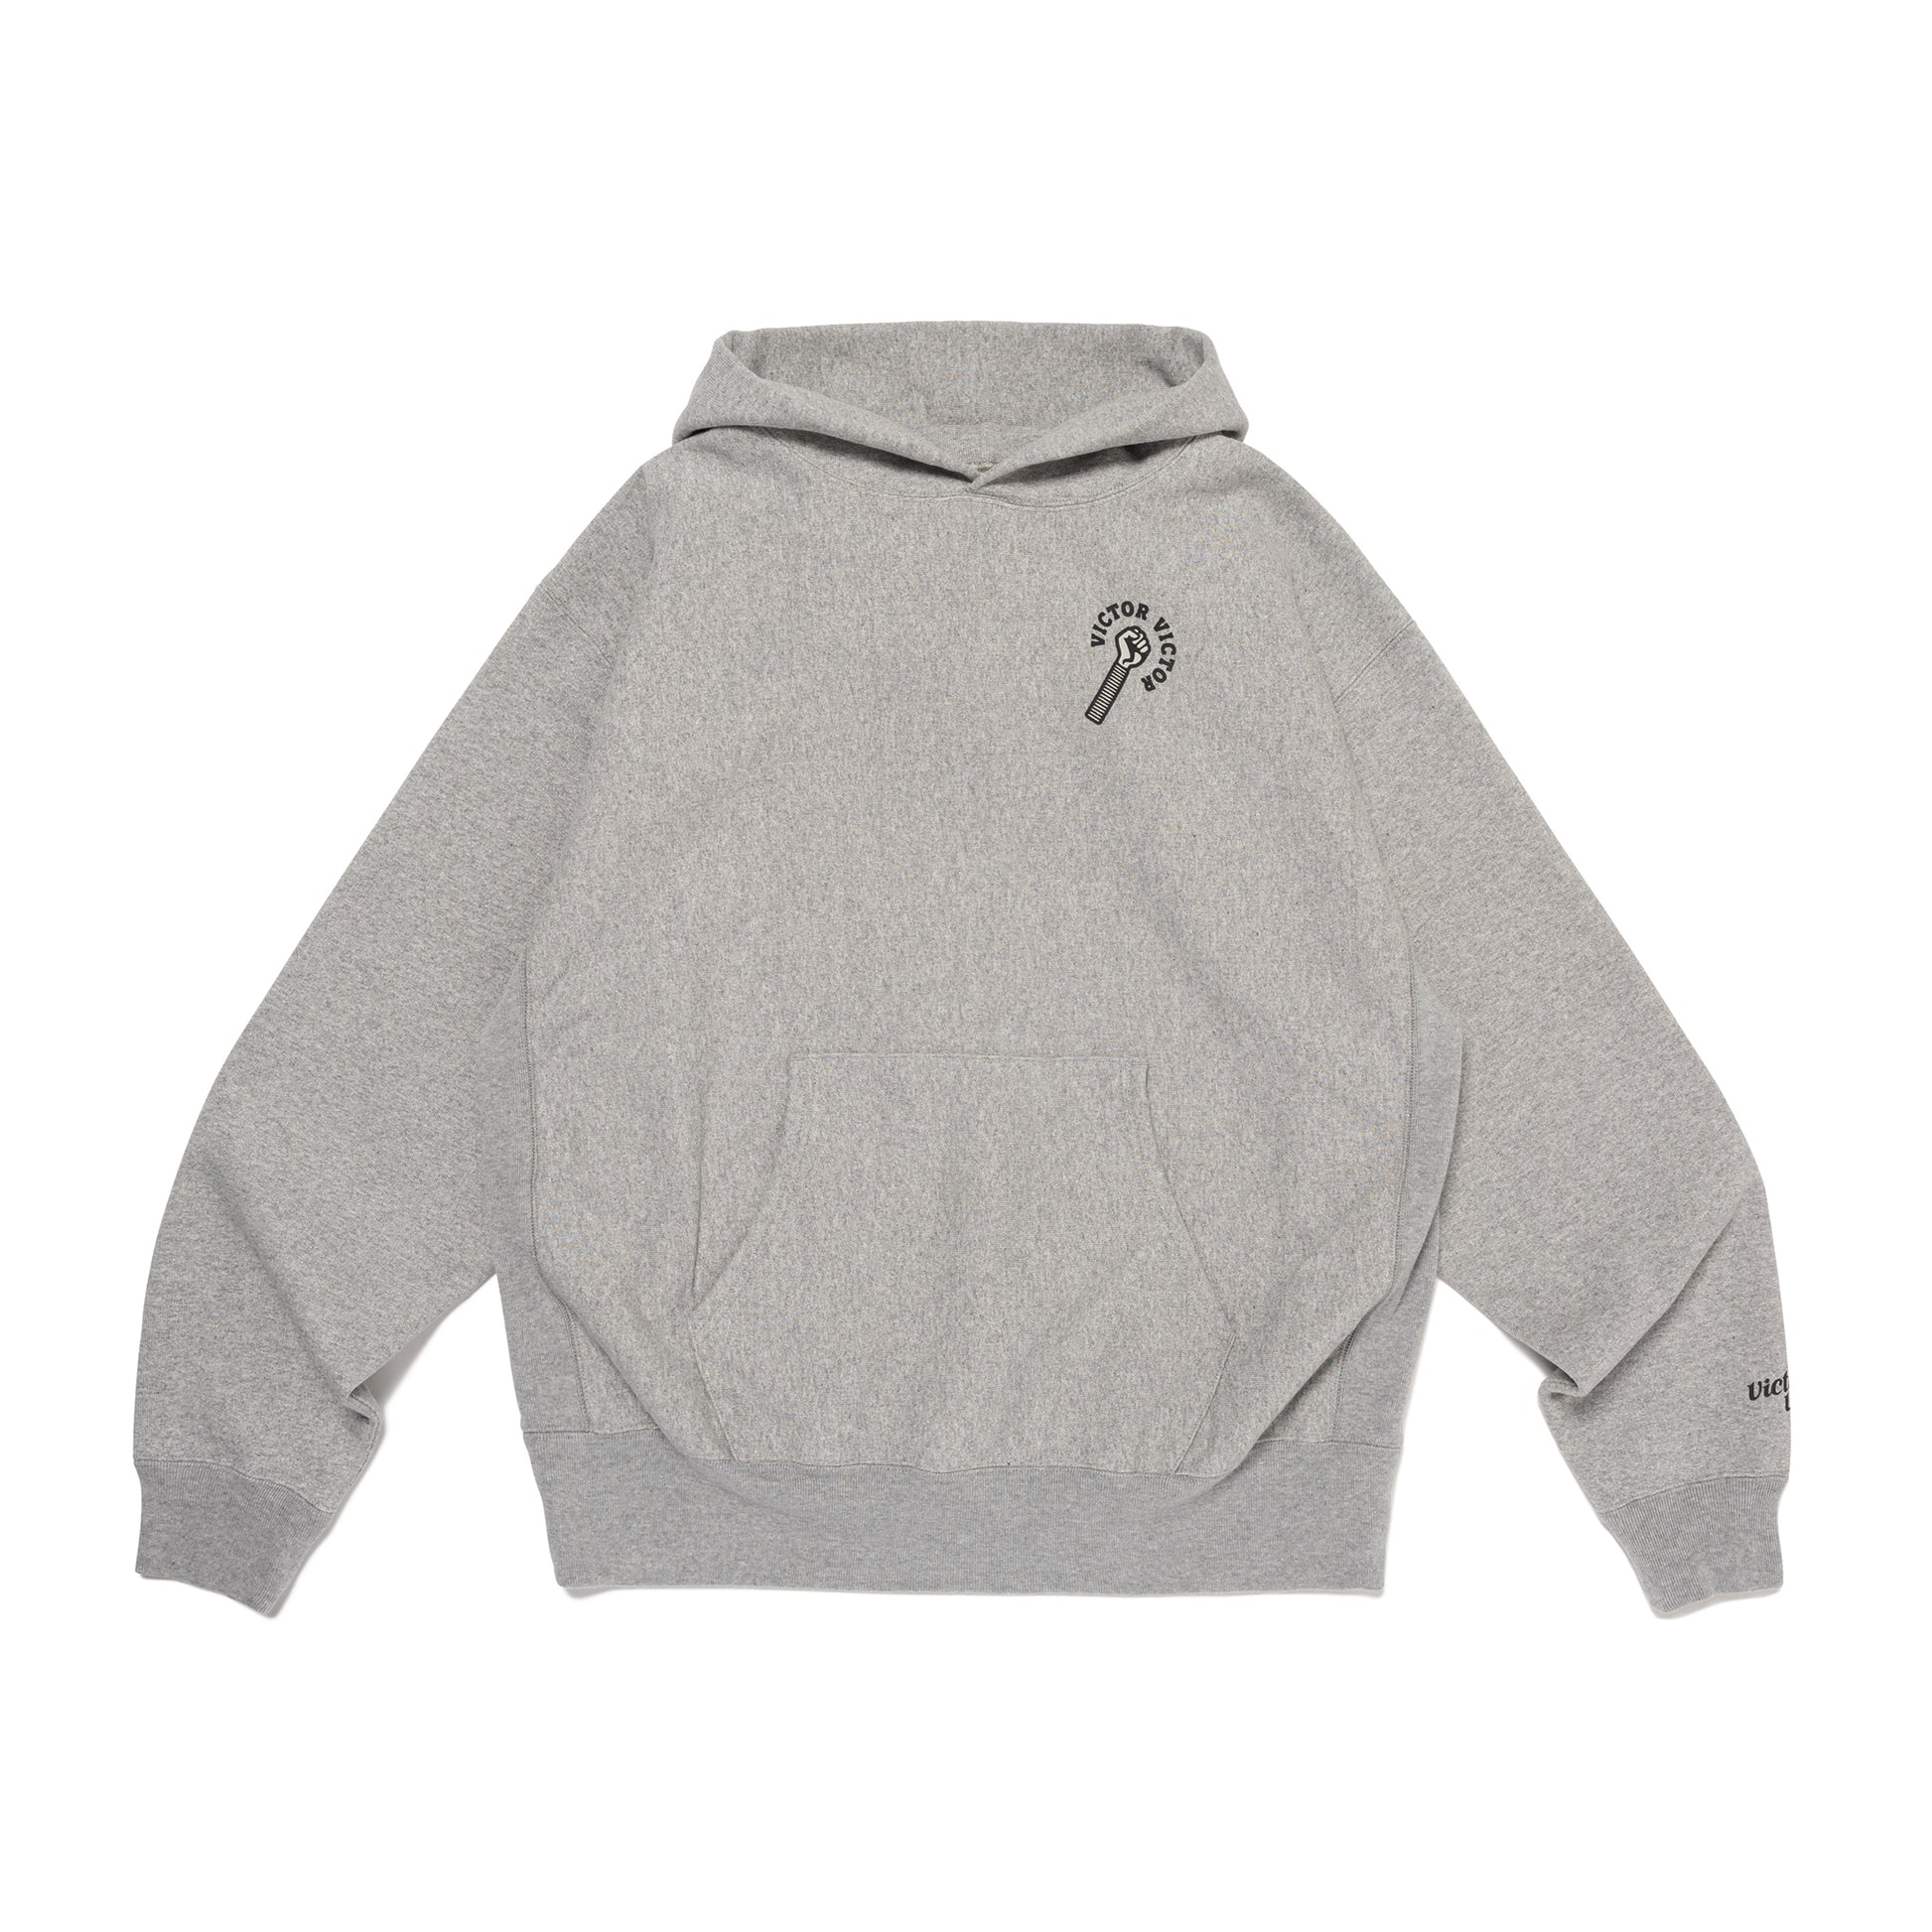 VICTOR VICTOR × HARDIES HEAVY WEIGHT HOODIE #1 GY-A